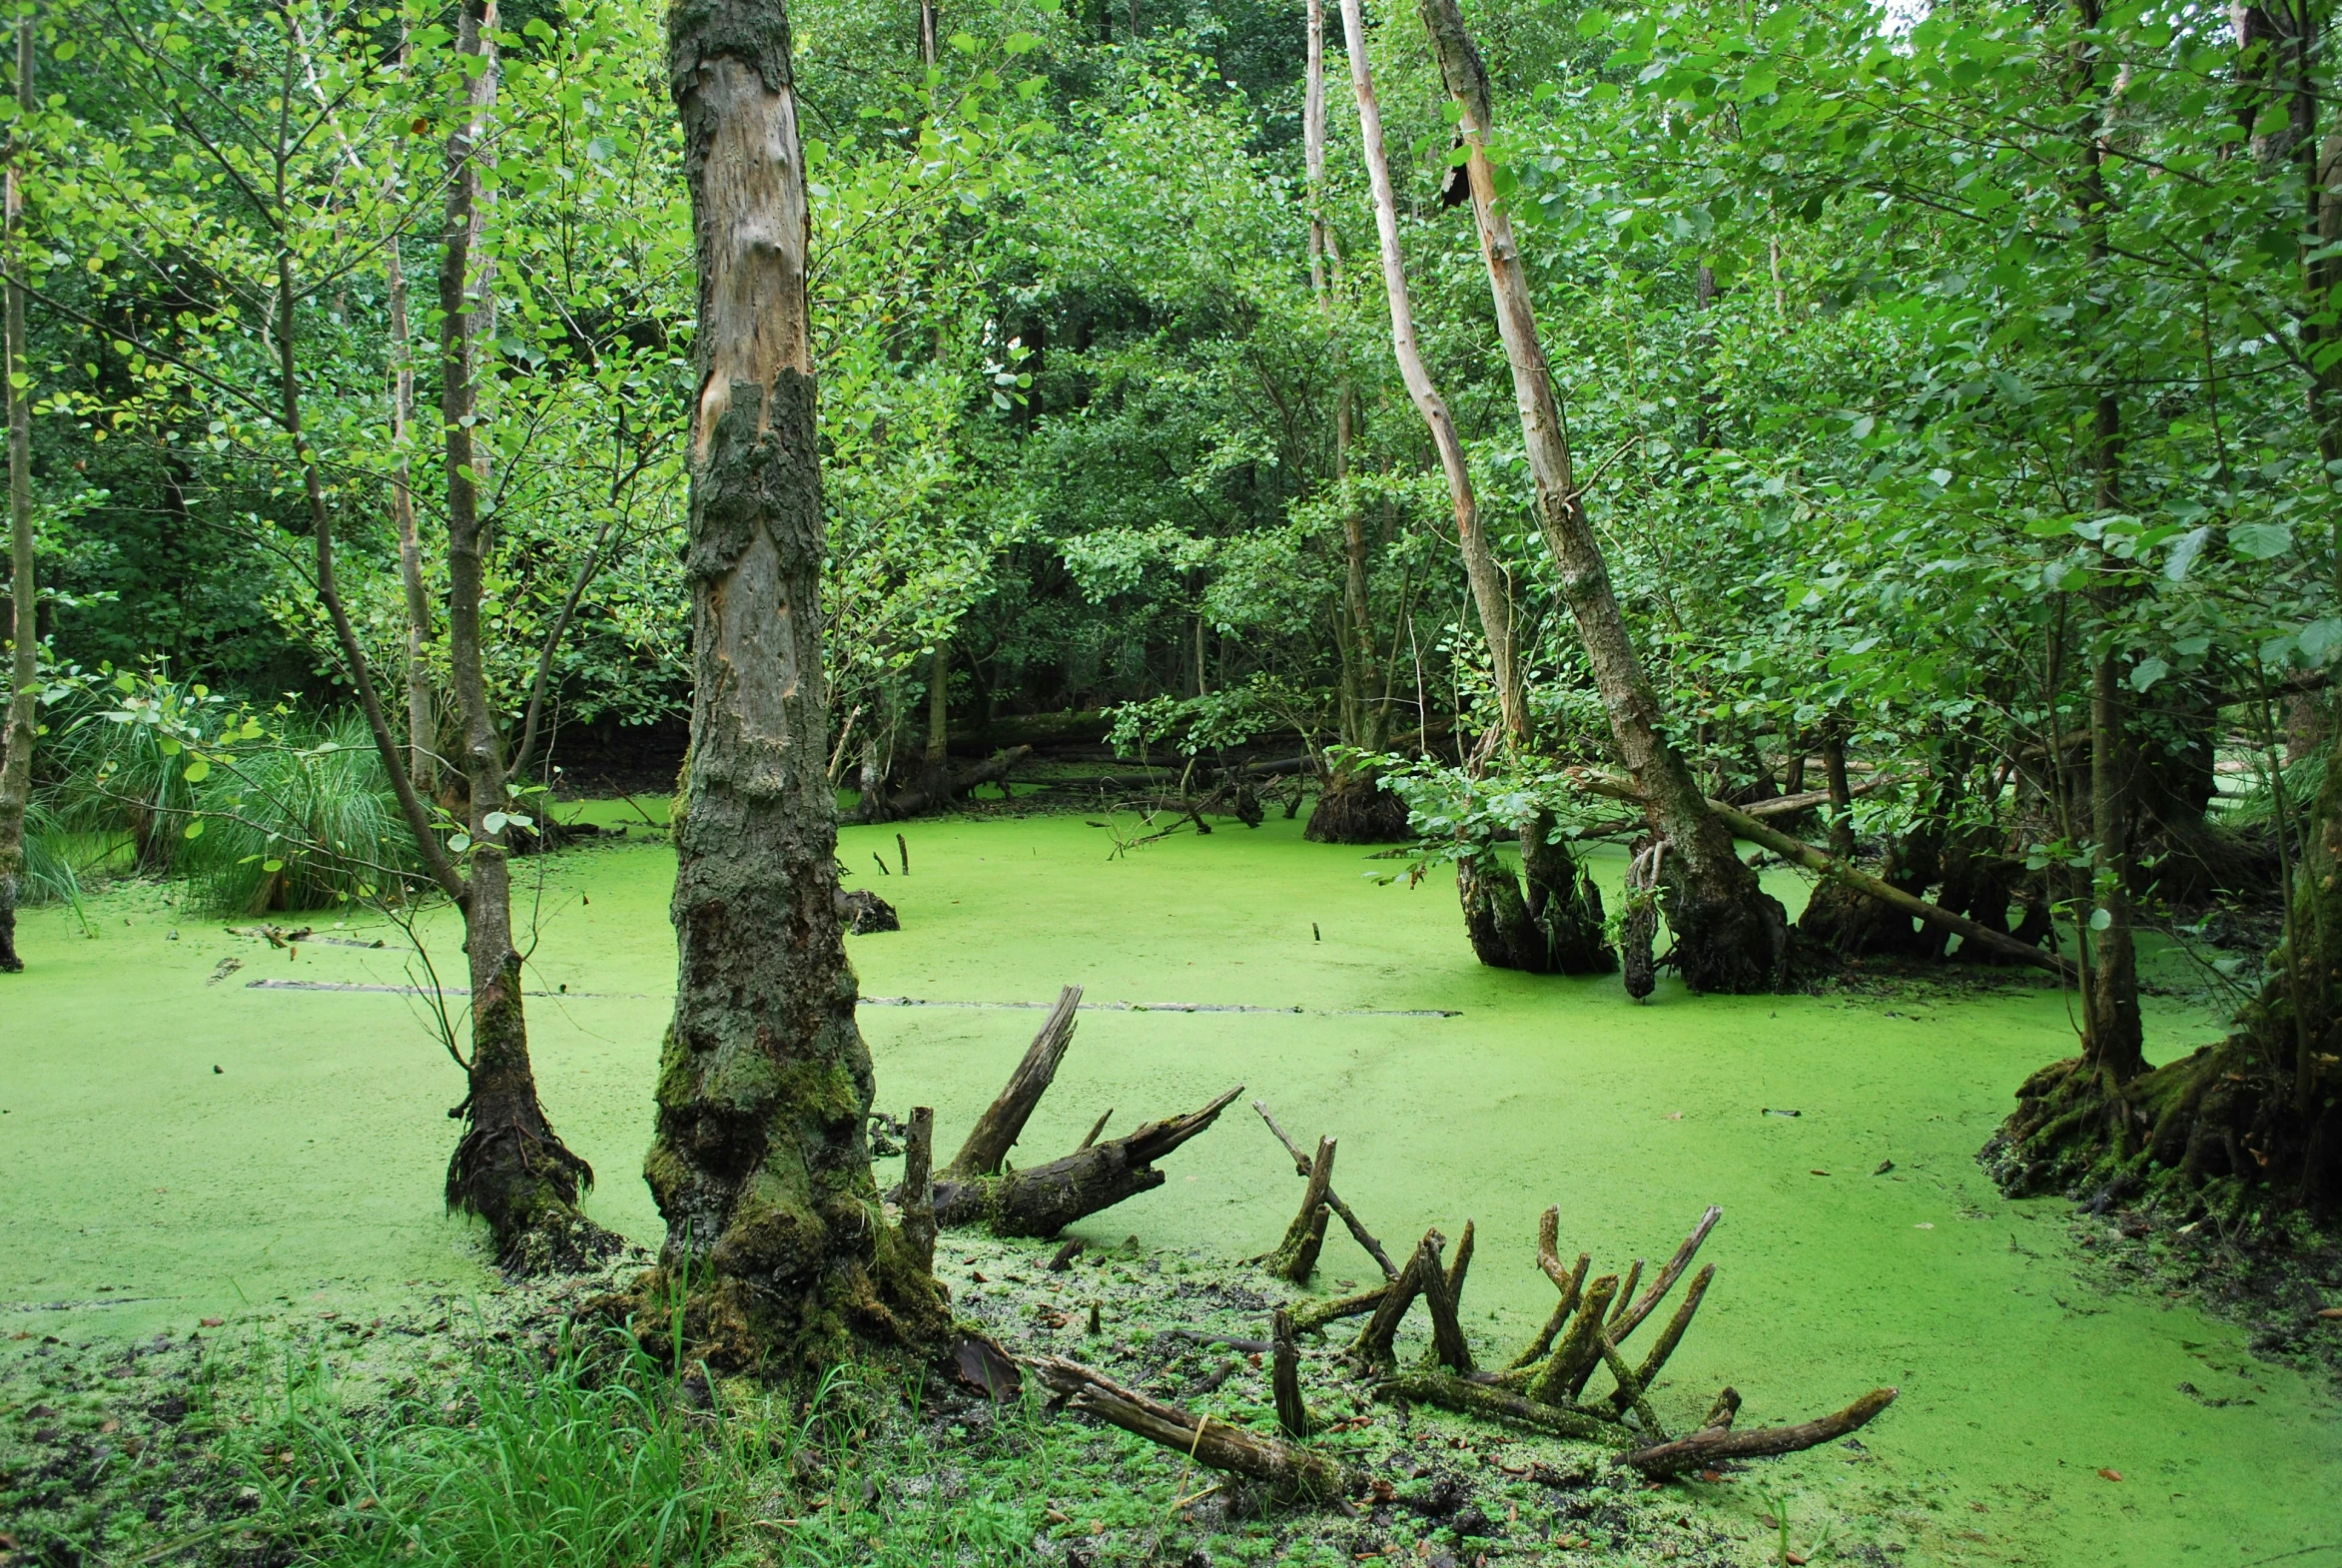 many green algae blooms on the swampy ground